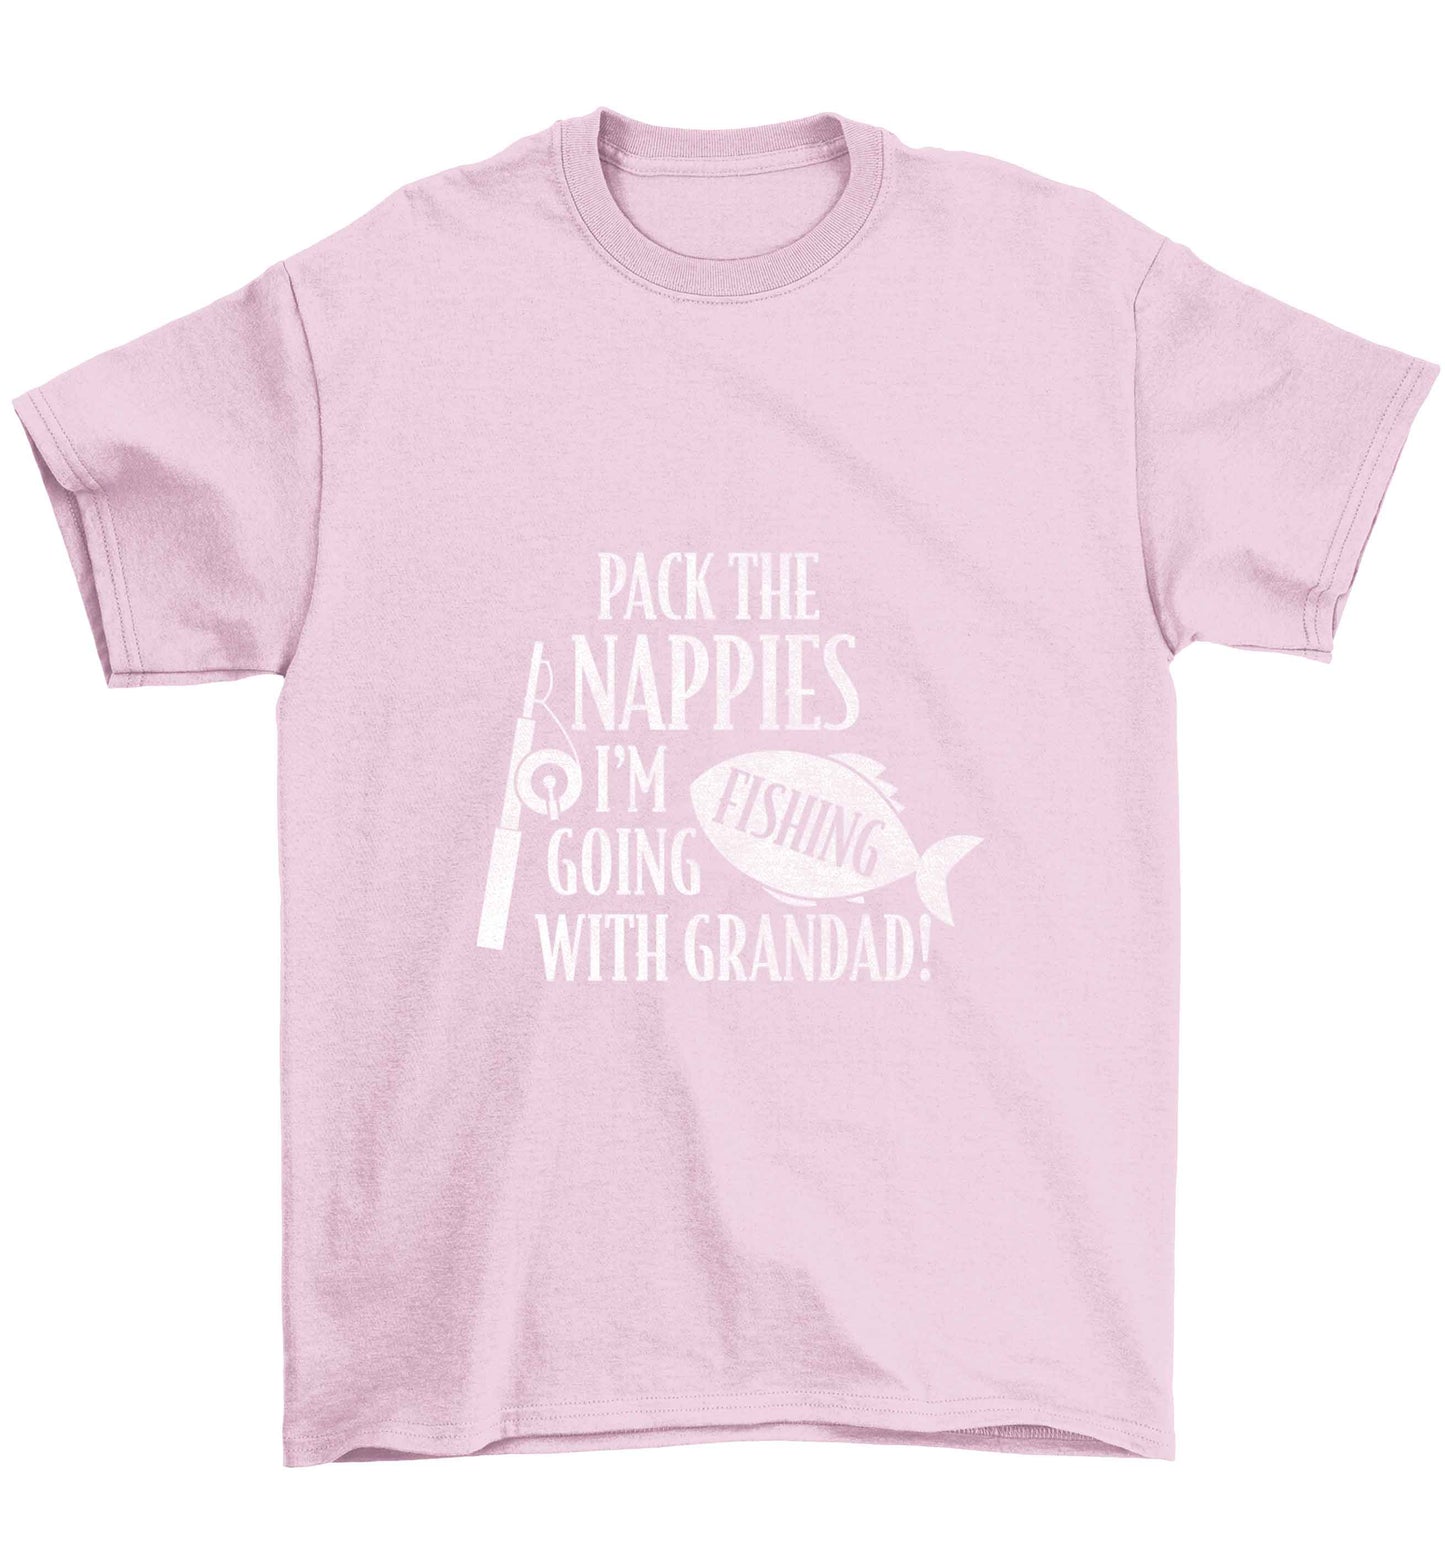 Pack the nappies I'm going fishing with Grandad Children's light pink Tshirt 12-13 Years